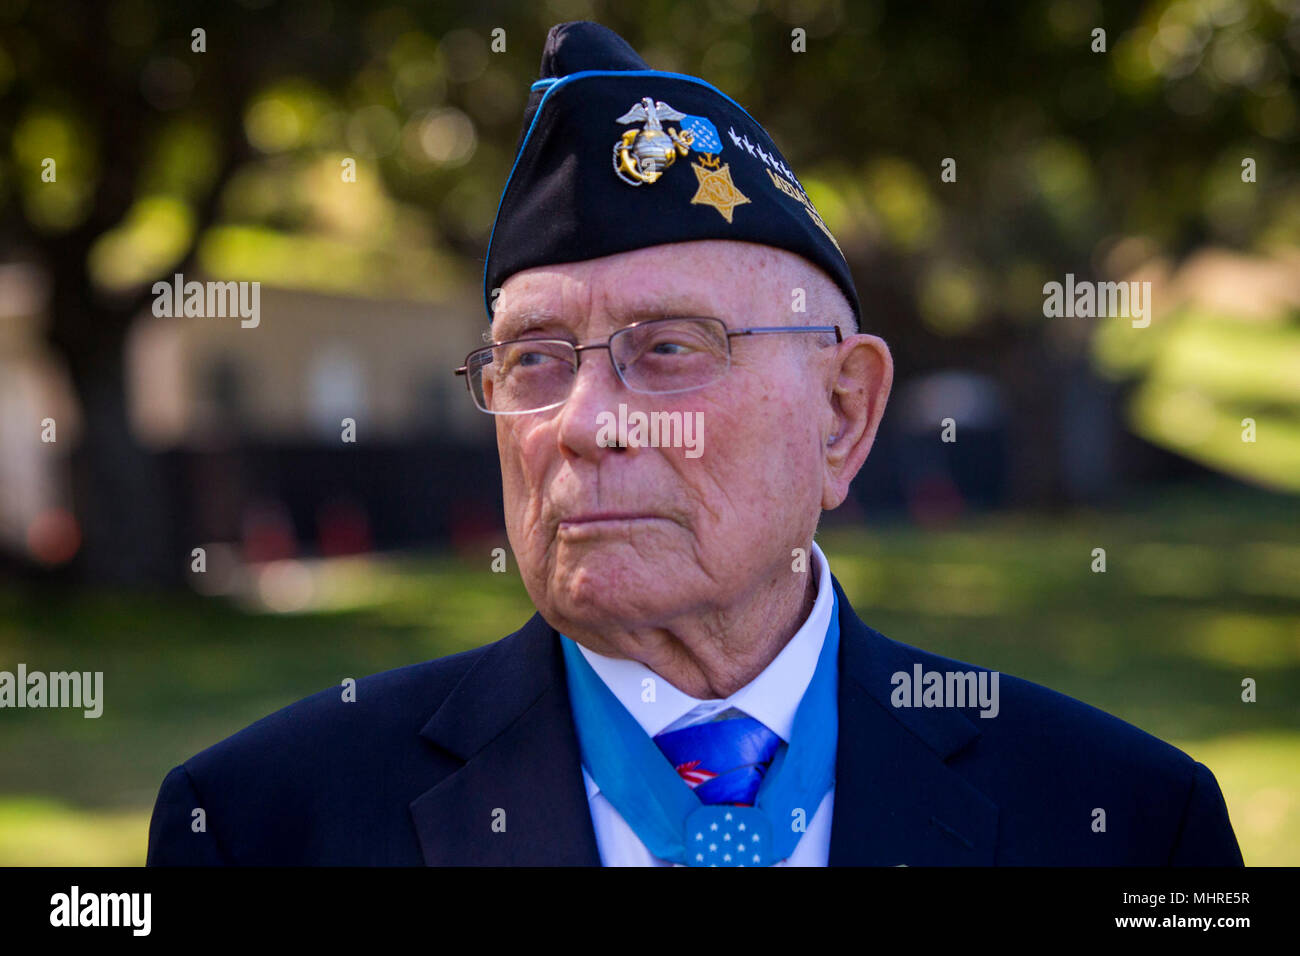 U.S. Marine Corps Chief Warrant Officer 4 Hershel 'Woody' Williams (Ret.) reflects on what took place on Iwo Jima at the National Memorial Cemetary of the Pacific, Honolulu HI, March 17, 2018. Williams traveled to Oahu to participate in various events and visit the graves of World War II veterans that made the ultimate sacrifice. (U.S. Marine Corps Stock Photo